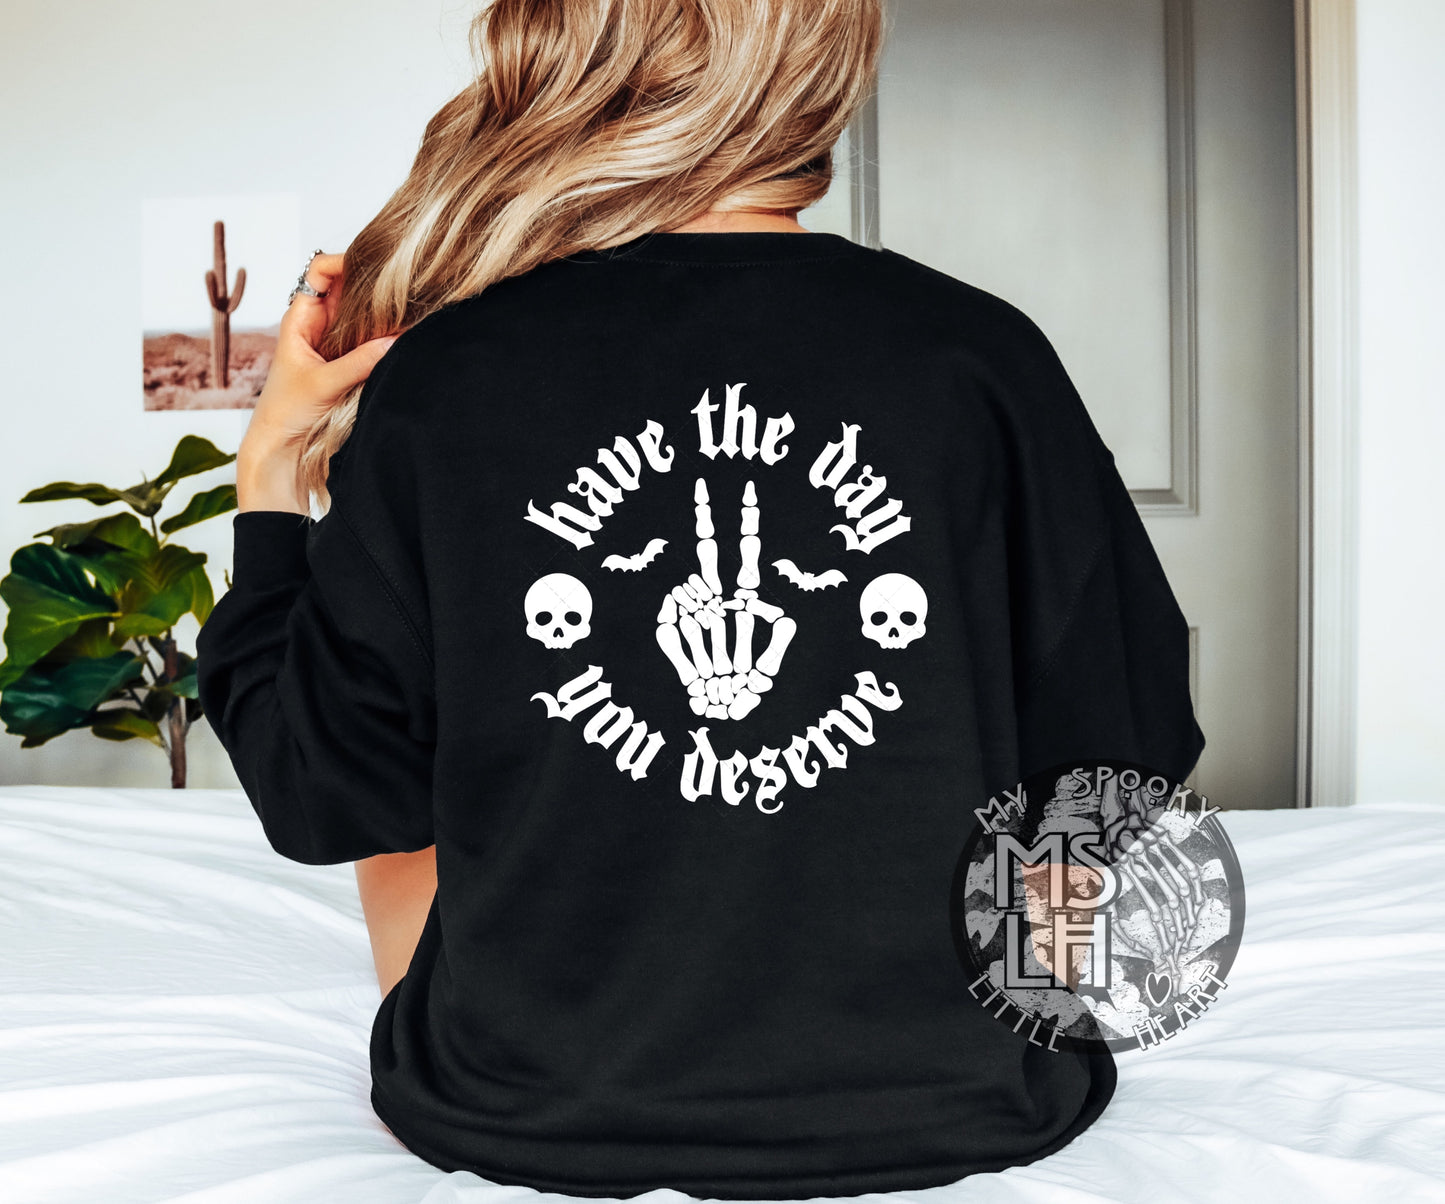 Have the day you deserve (White Text) Front and back design